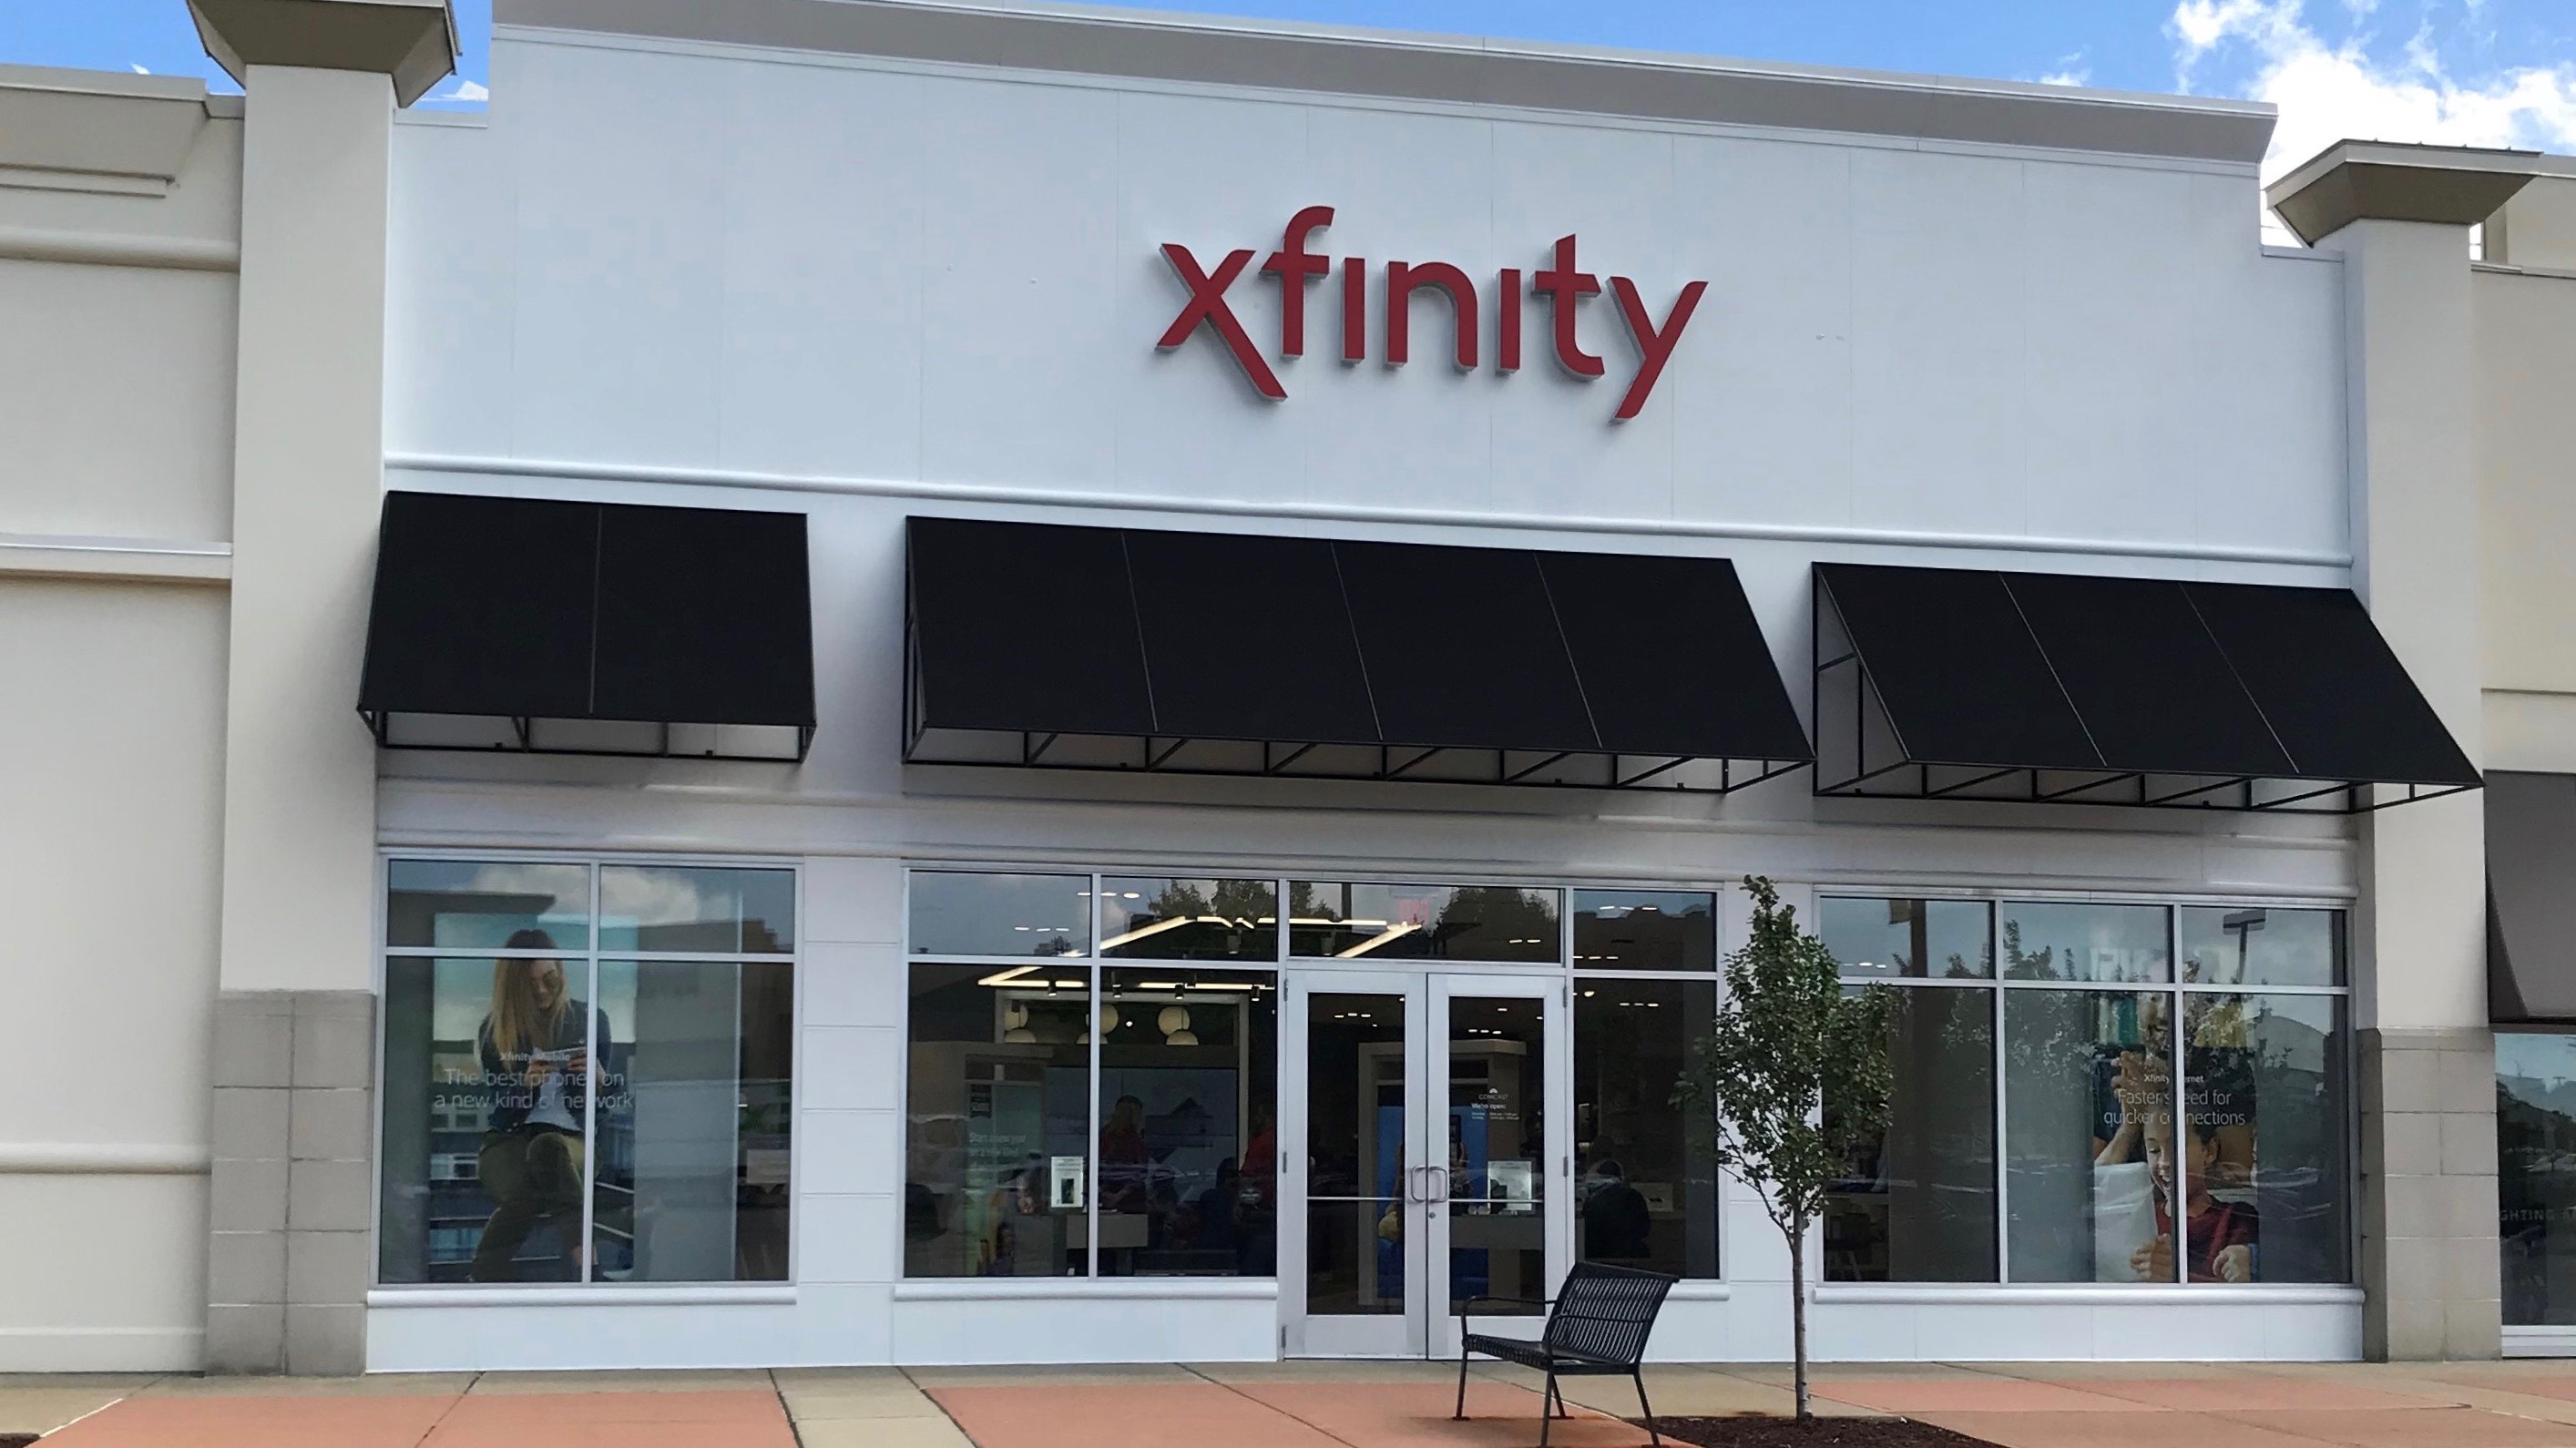 Exterior of the Xfinity Store in Dearborn, MI.